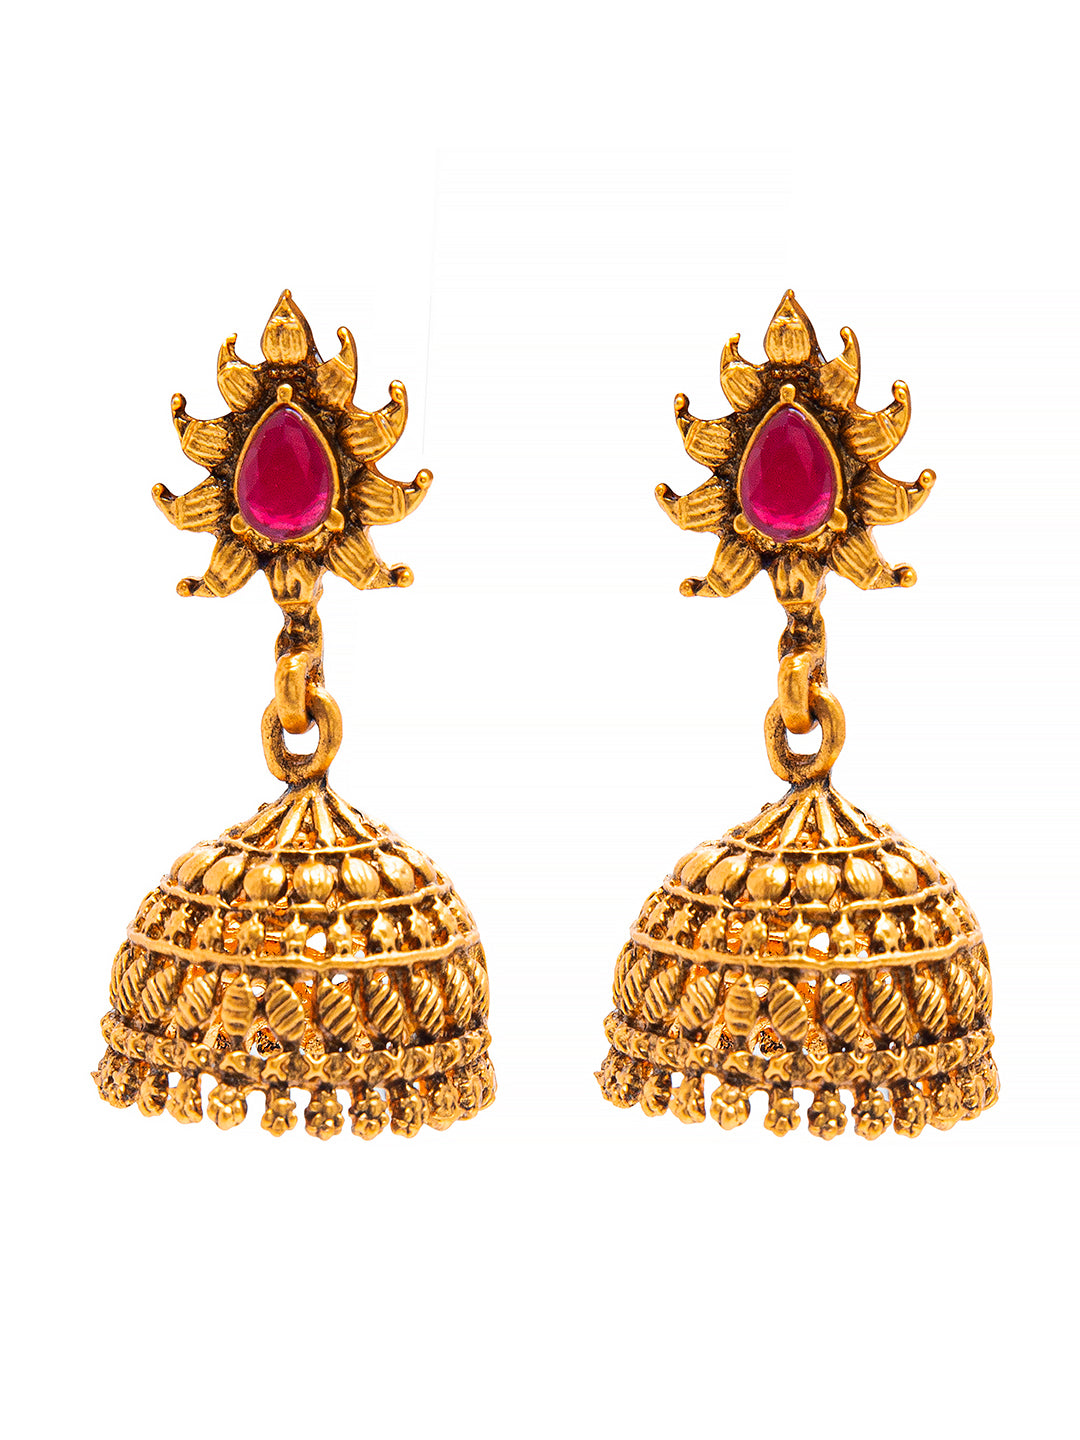 PRIVIU Antique Traditional Gold Plated Stylish Red Polki Jhumka Earrings   Priviu